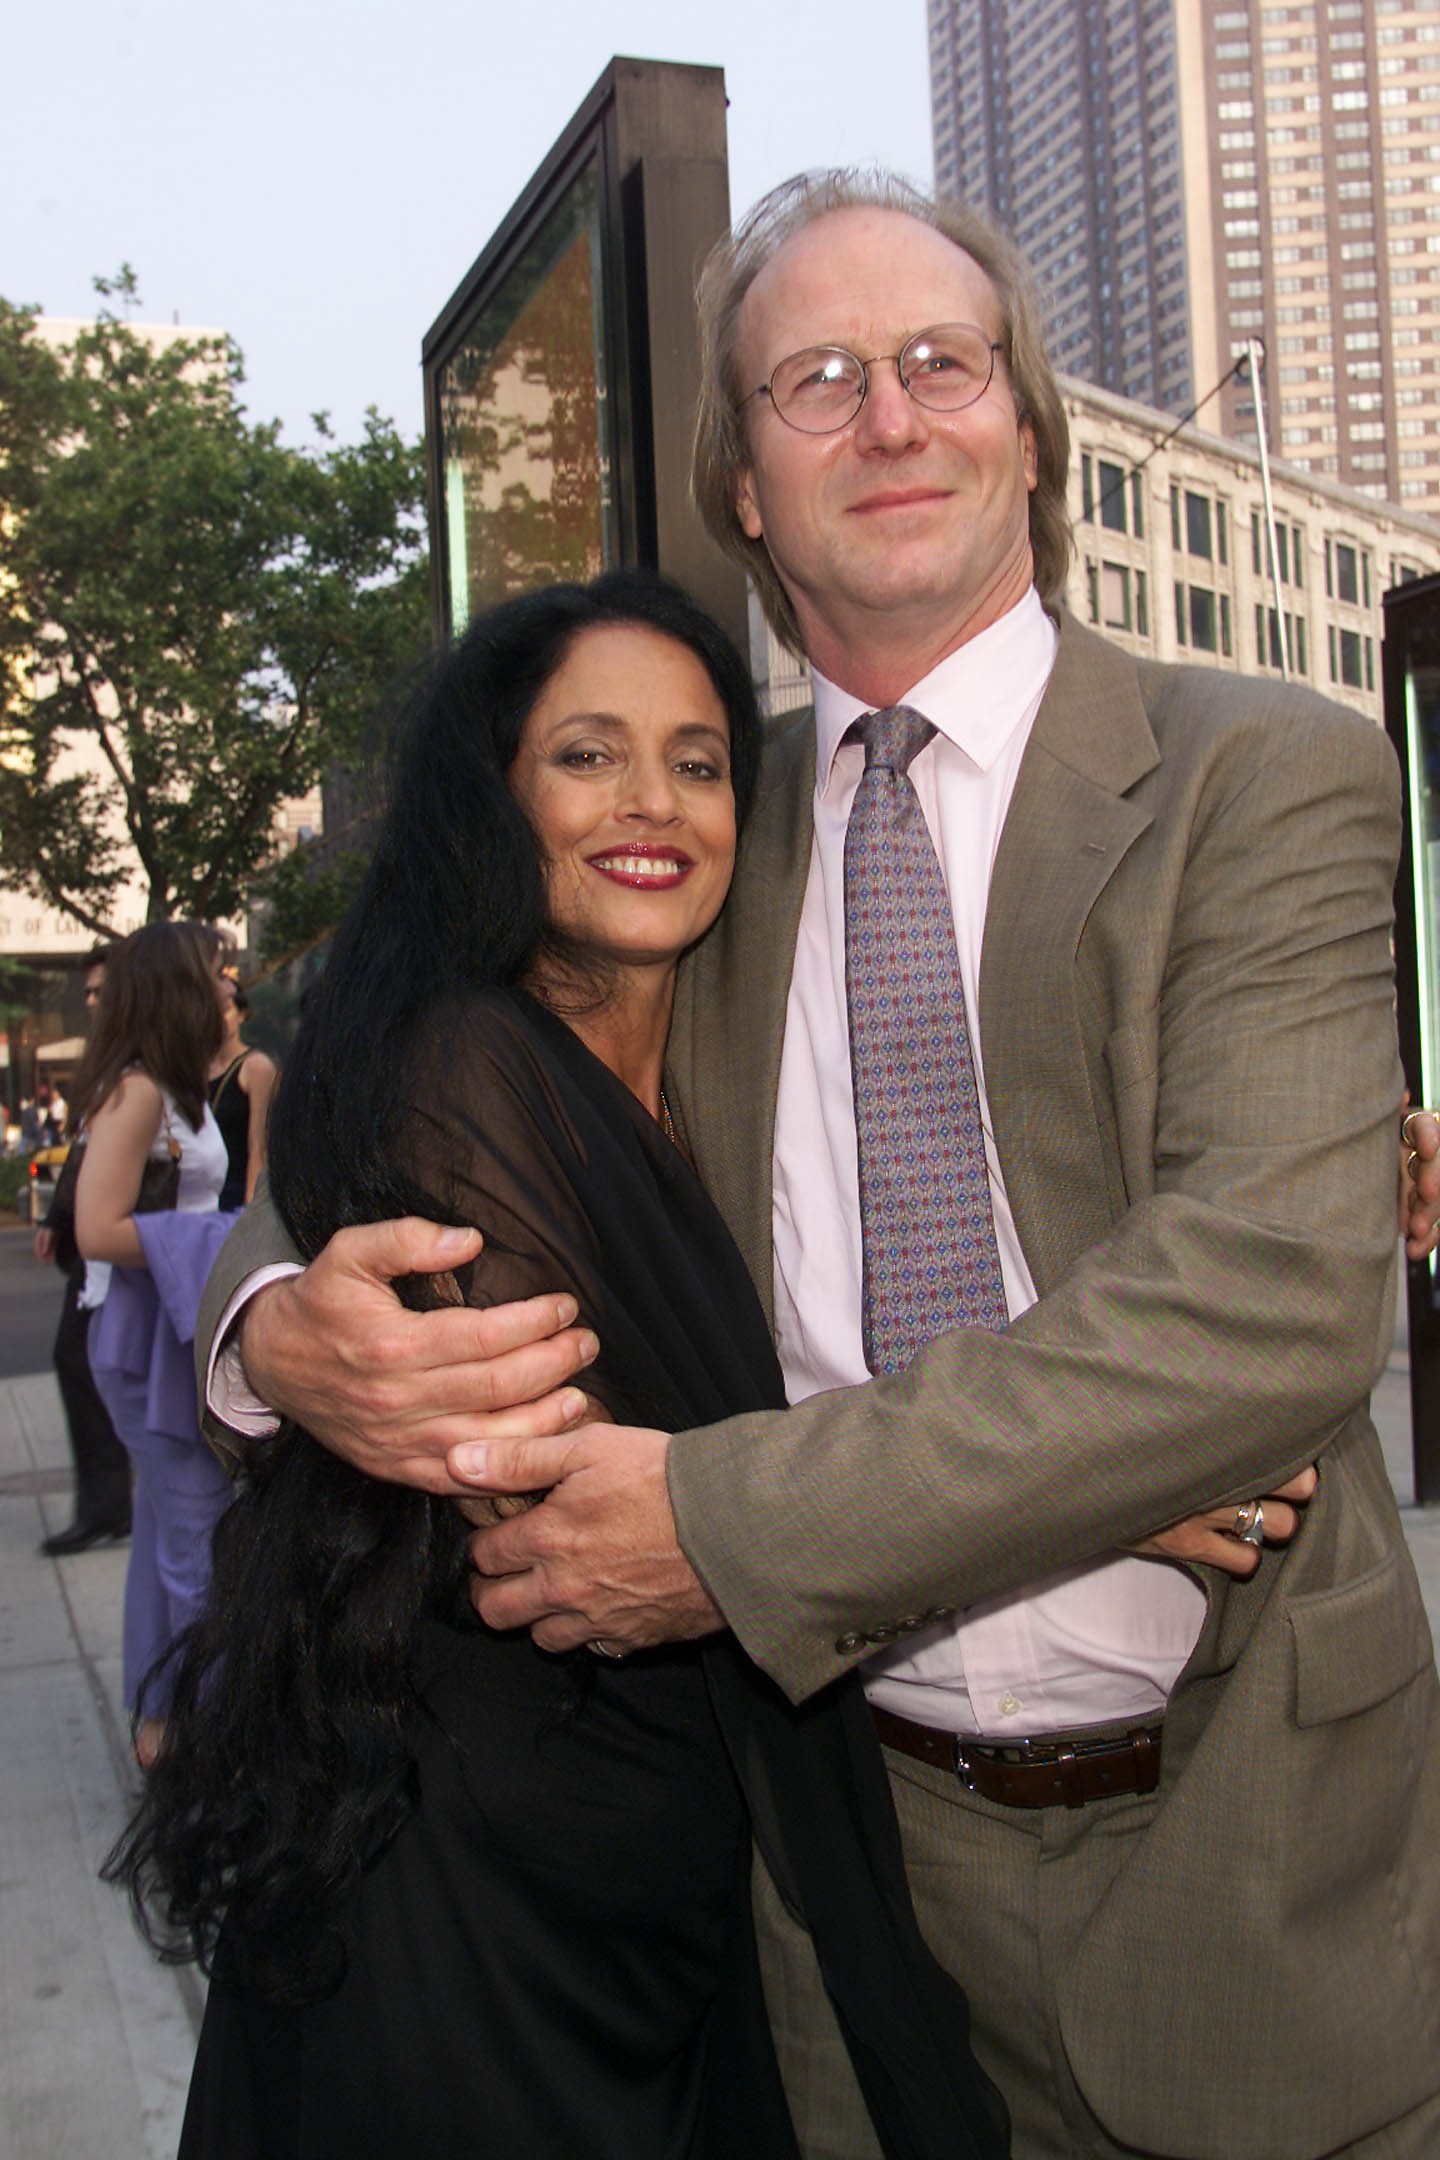 William Hurt and Sonia Braga at the 'Kiss of the Spider Woman' benefit screening during the 12th Annual Human Rights Watch International Film Festival at Alice Tully Hall, Lincoln Center in New York City. 06/13/2001. (Foto: Getty Images)